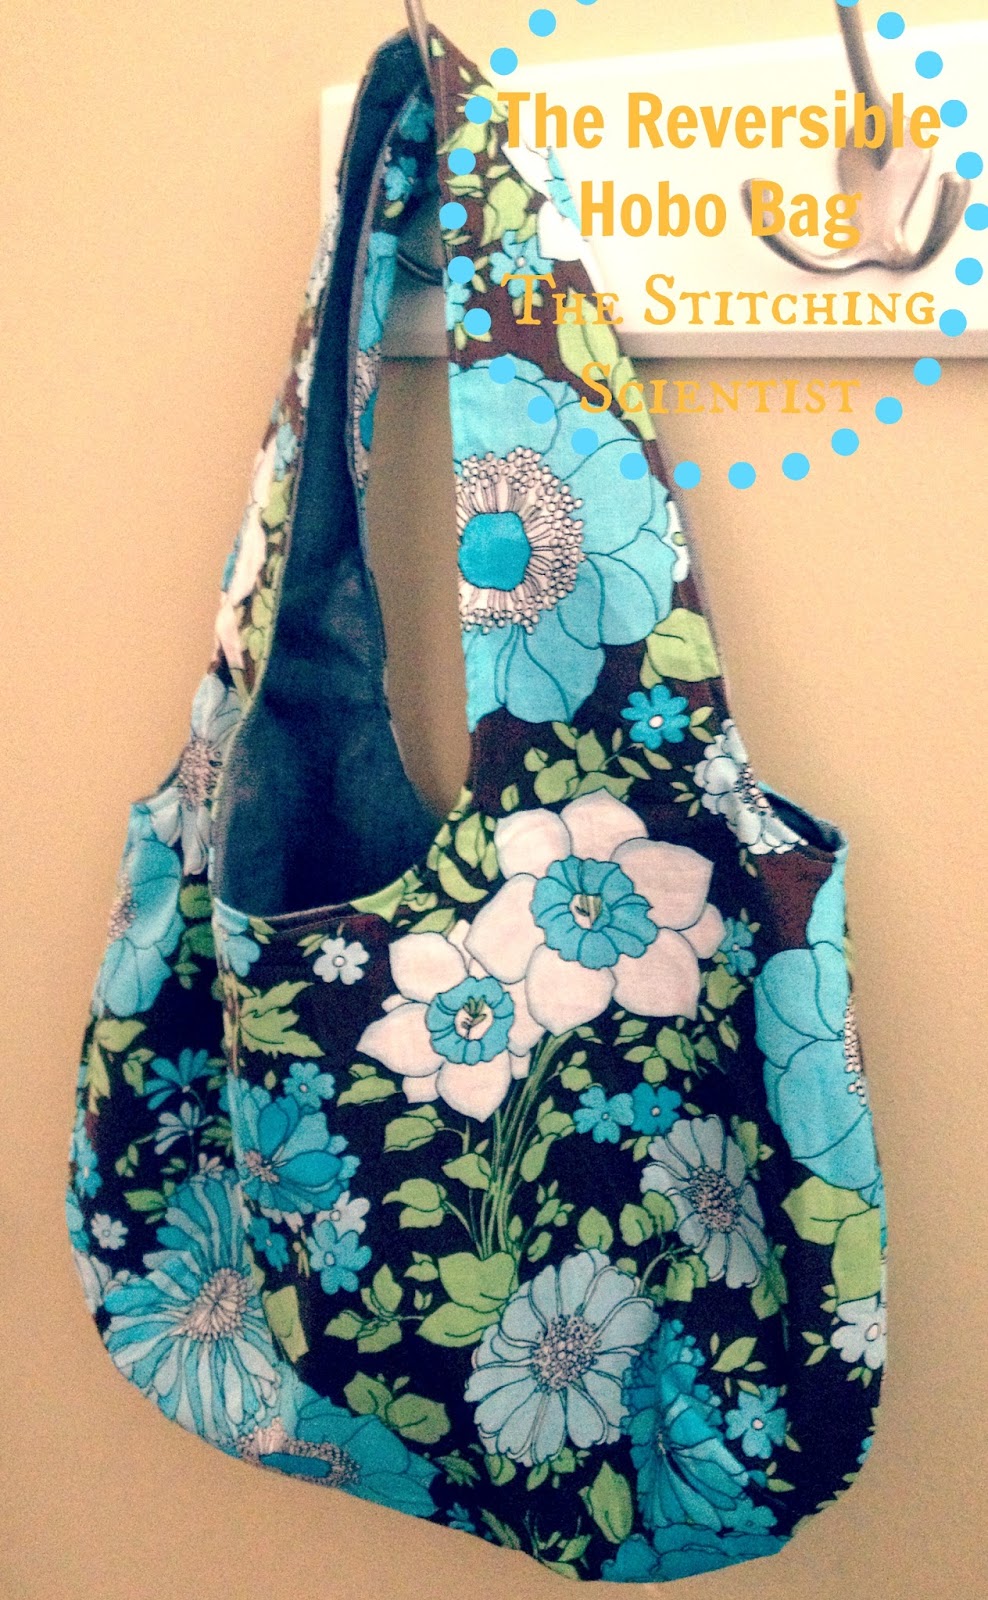 The Reversible Hobo Bag | The Stitching Scientist